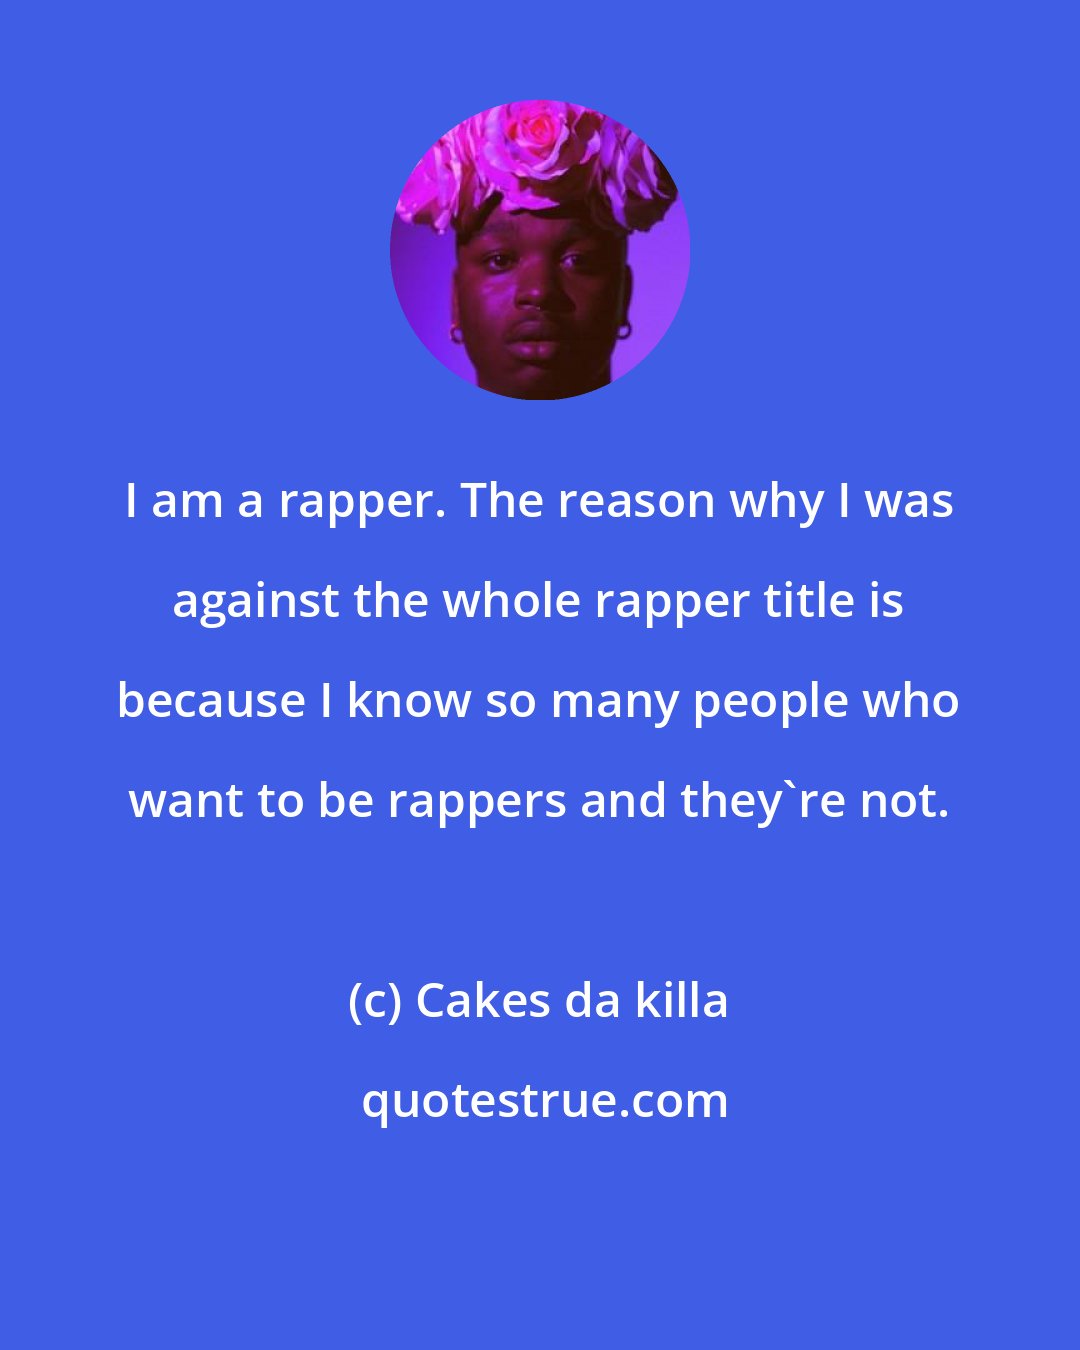 Cakes da killa: I am a rapper. The reason why I was against the whole rapper title is because I know so many people who want to be rappers and they're not.